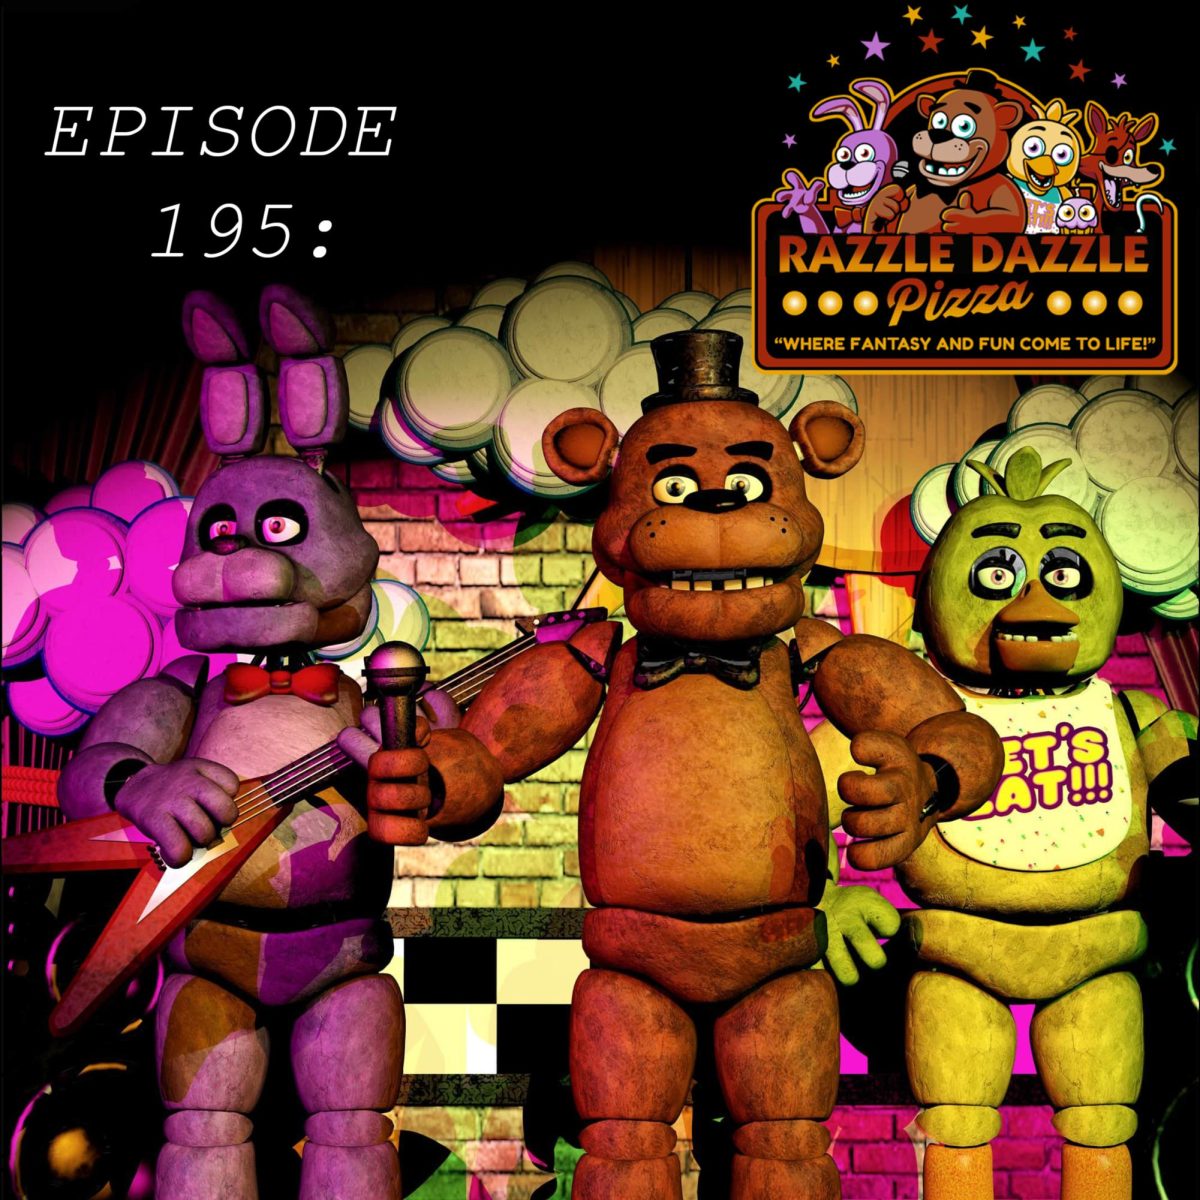 Episode 195: Five Night at Freddy’s